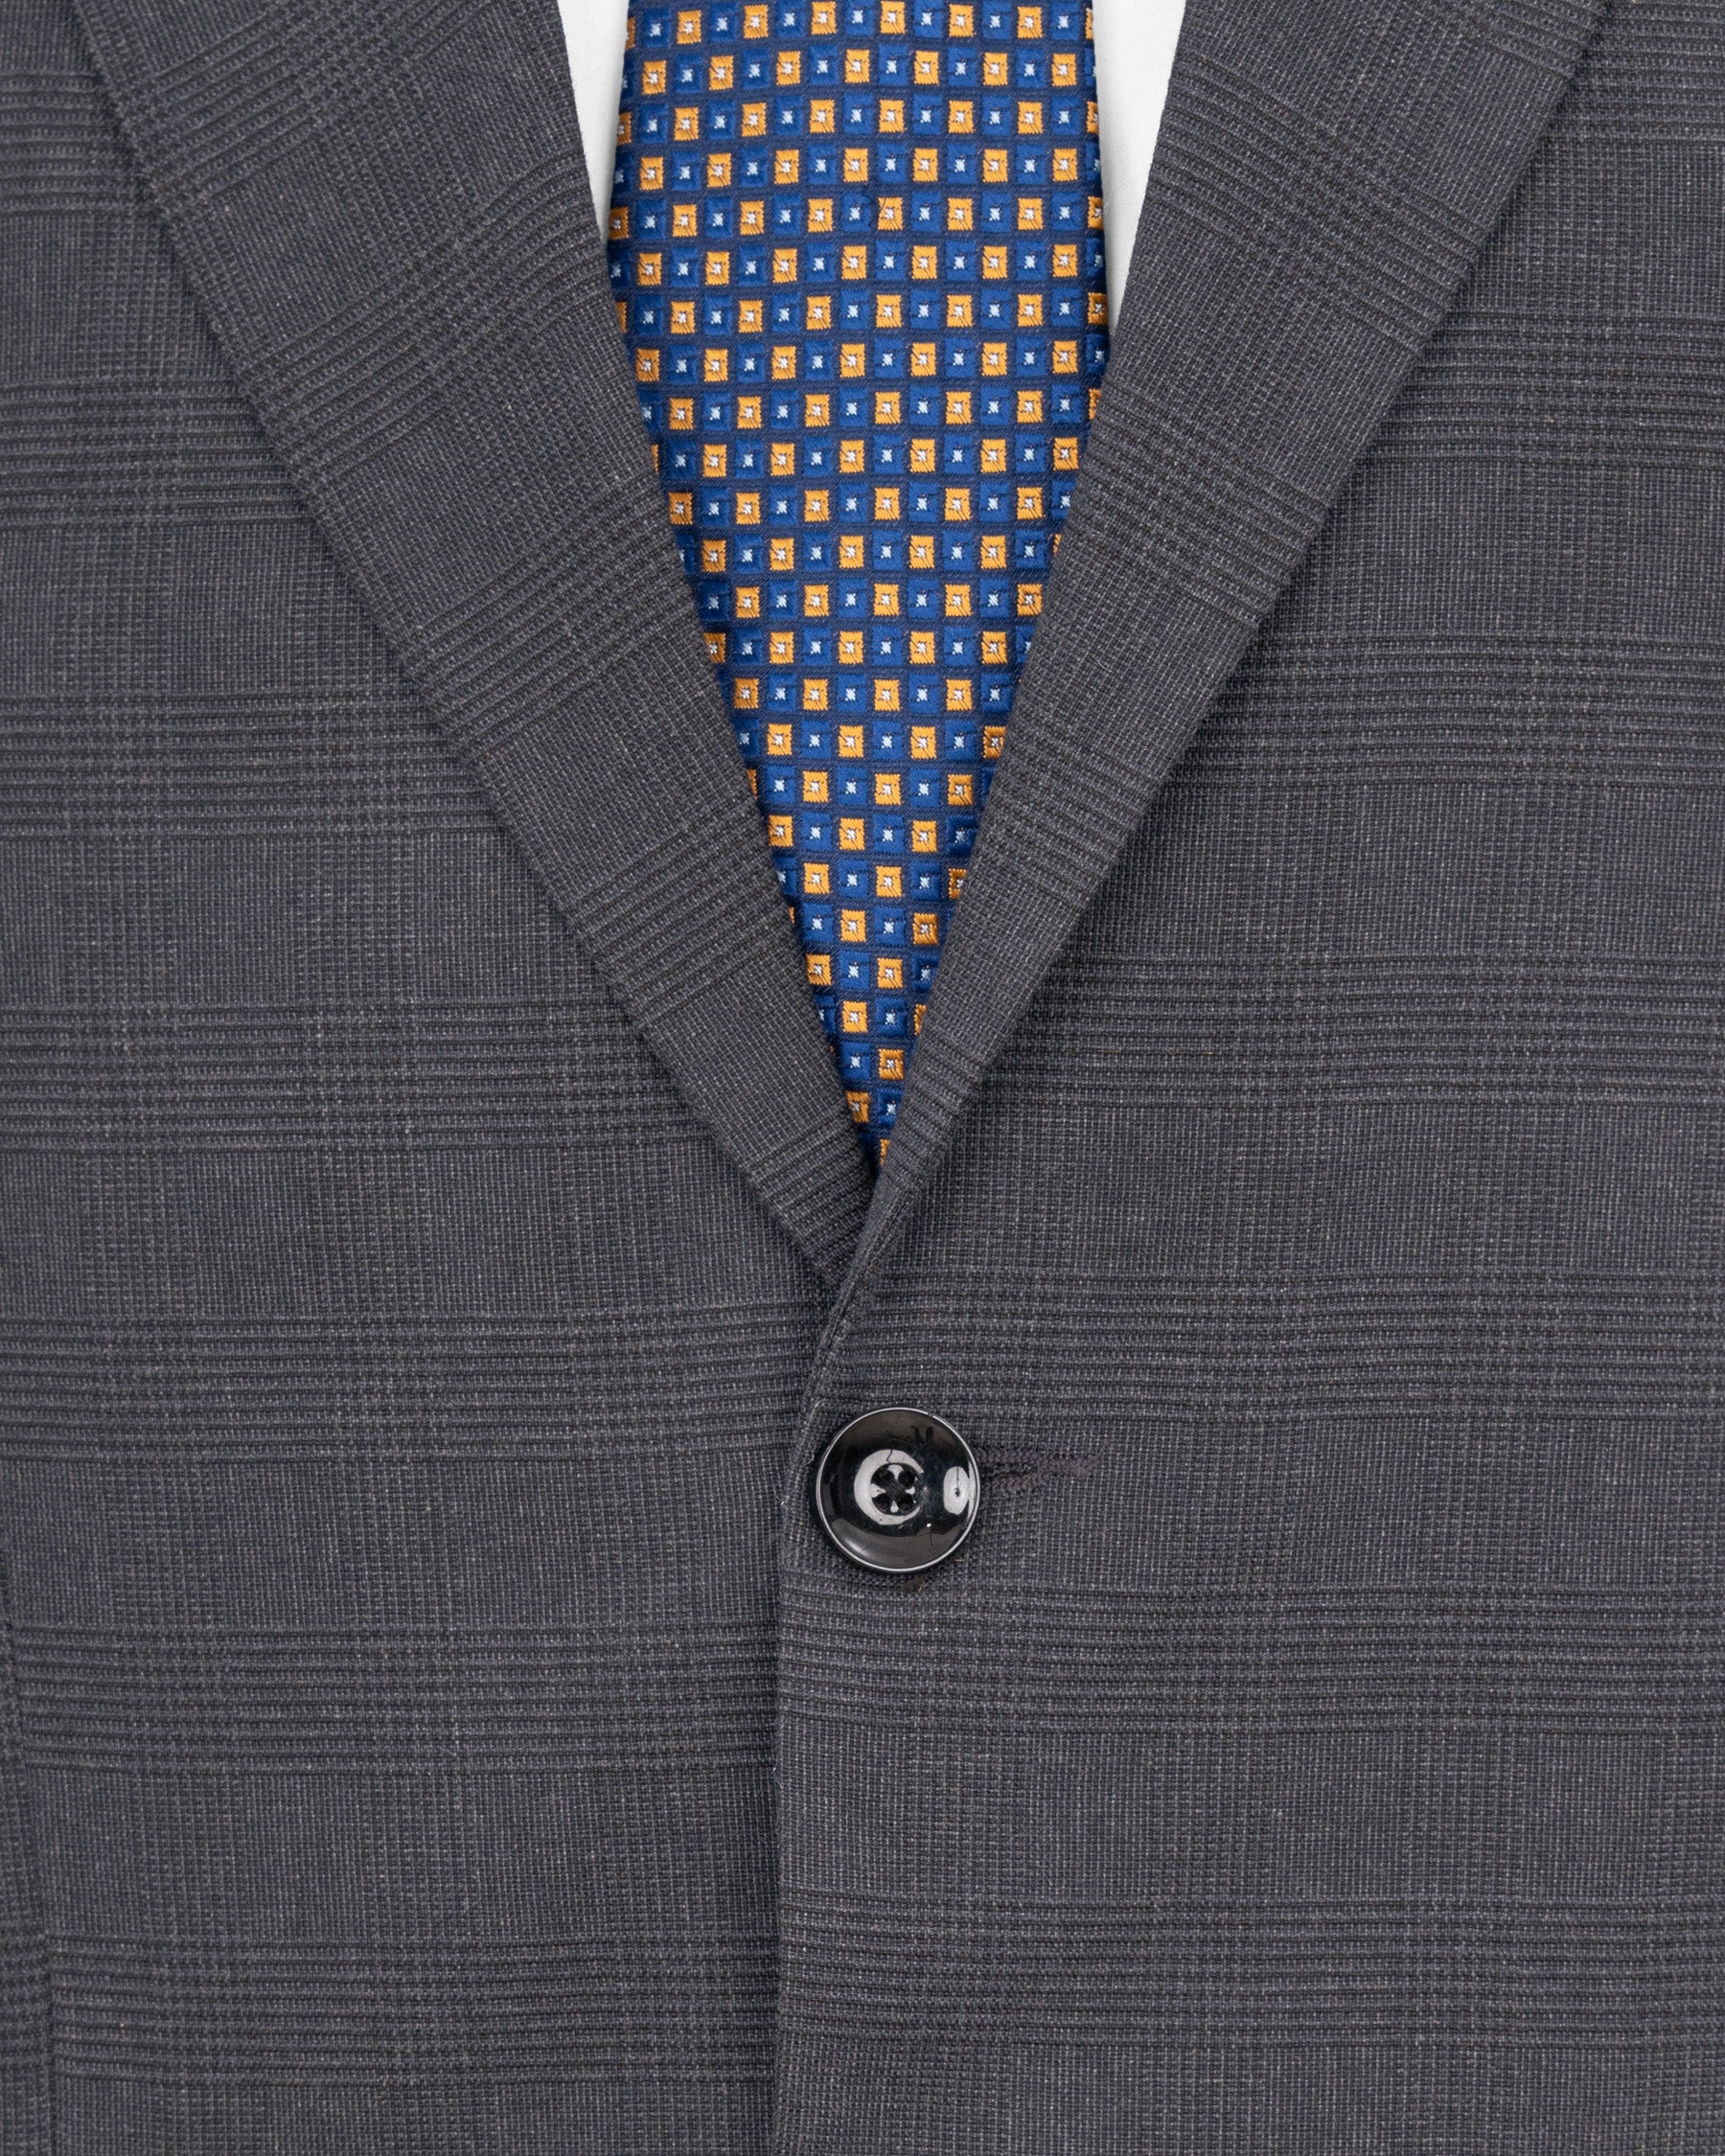 Gravel Gray Plaid Single Breasted Suit ST1849-SB-36, ST1849-SB-38, ST1849-SB-40, ST1849-SB-42, ST1849-SB-44, ST1849-SB-46, ST1849-SB-48, ST1849-SB-50, ST1849-SB-52, ST1849-SB-54, ST1849-SB-56, ST1849-SB-58, ST1849-SB-60C